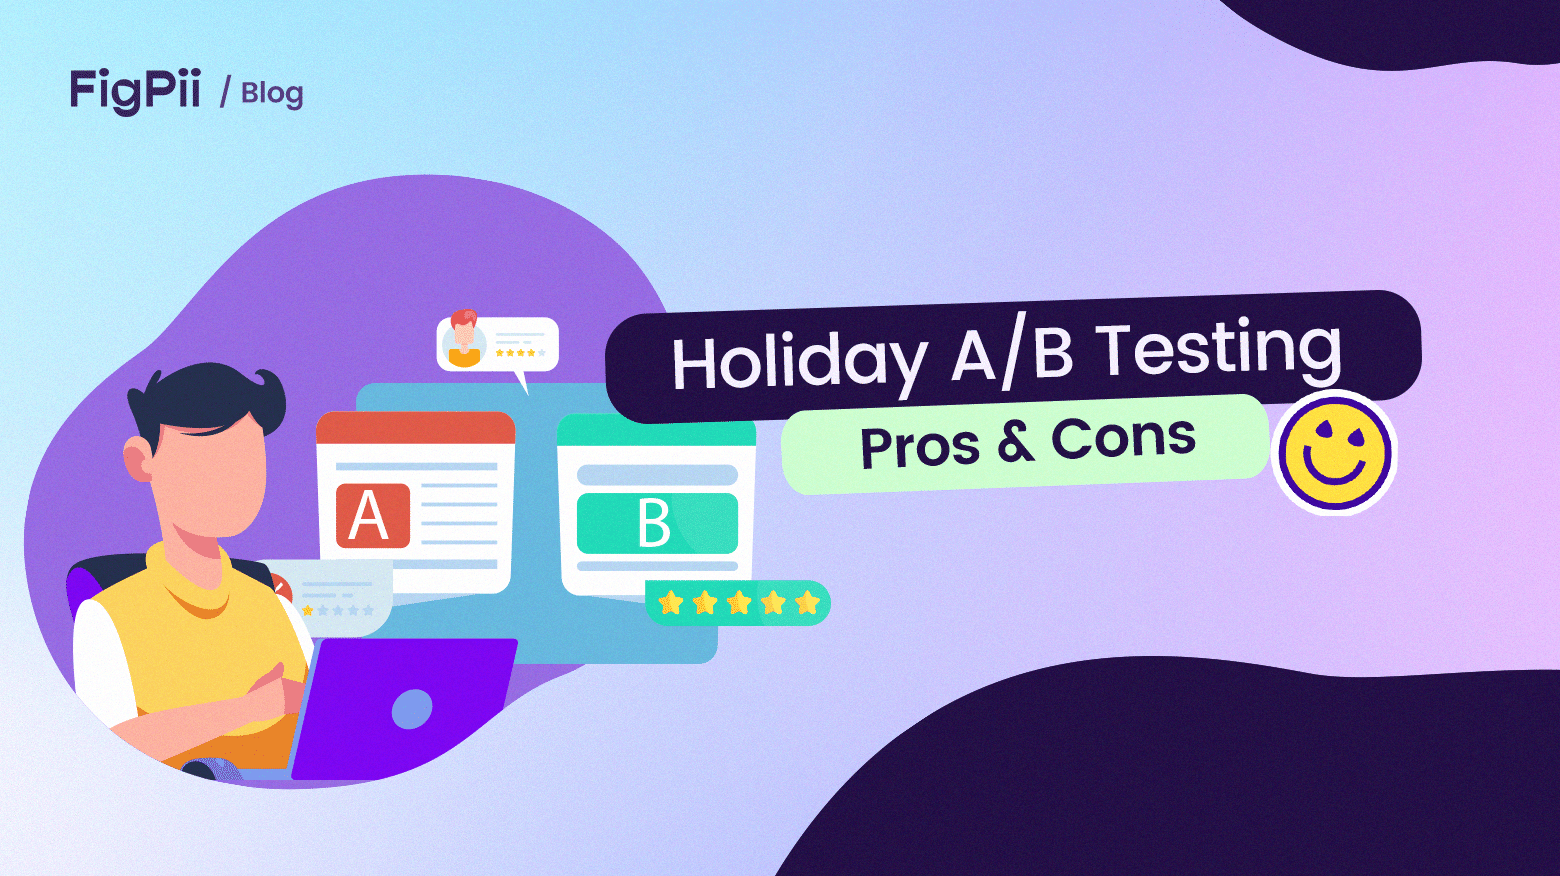 Cover Image for "Holiday A/B Testing"